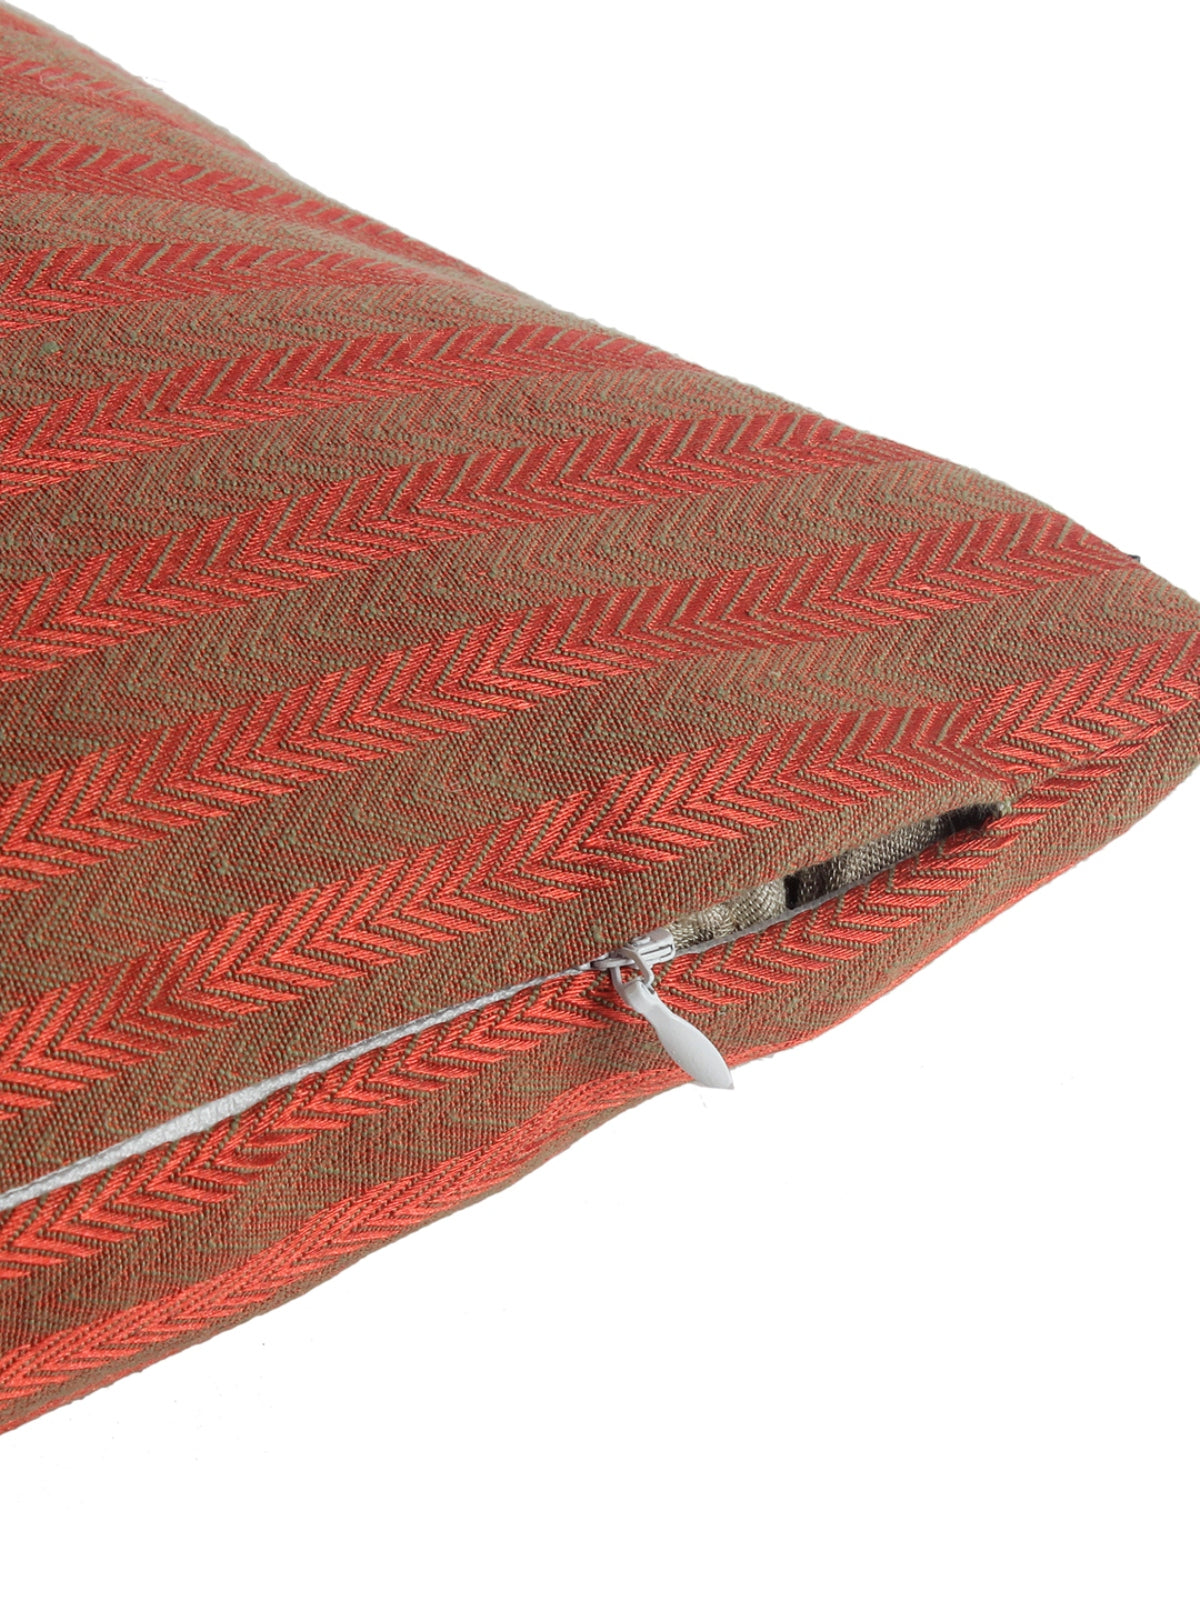 ROMEE Red Striped Printed Cushion Covers Set of 2